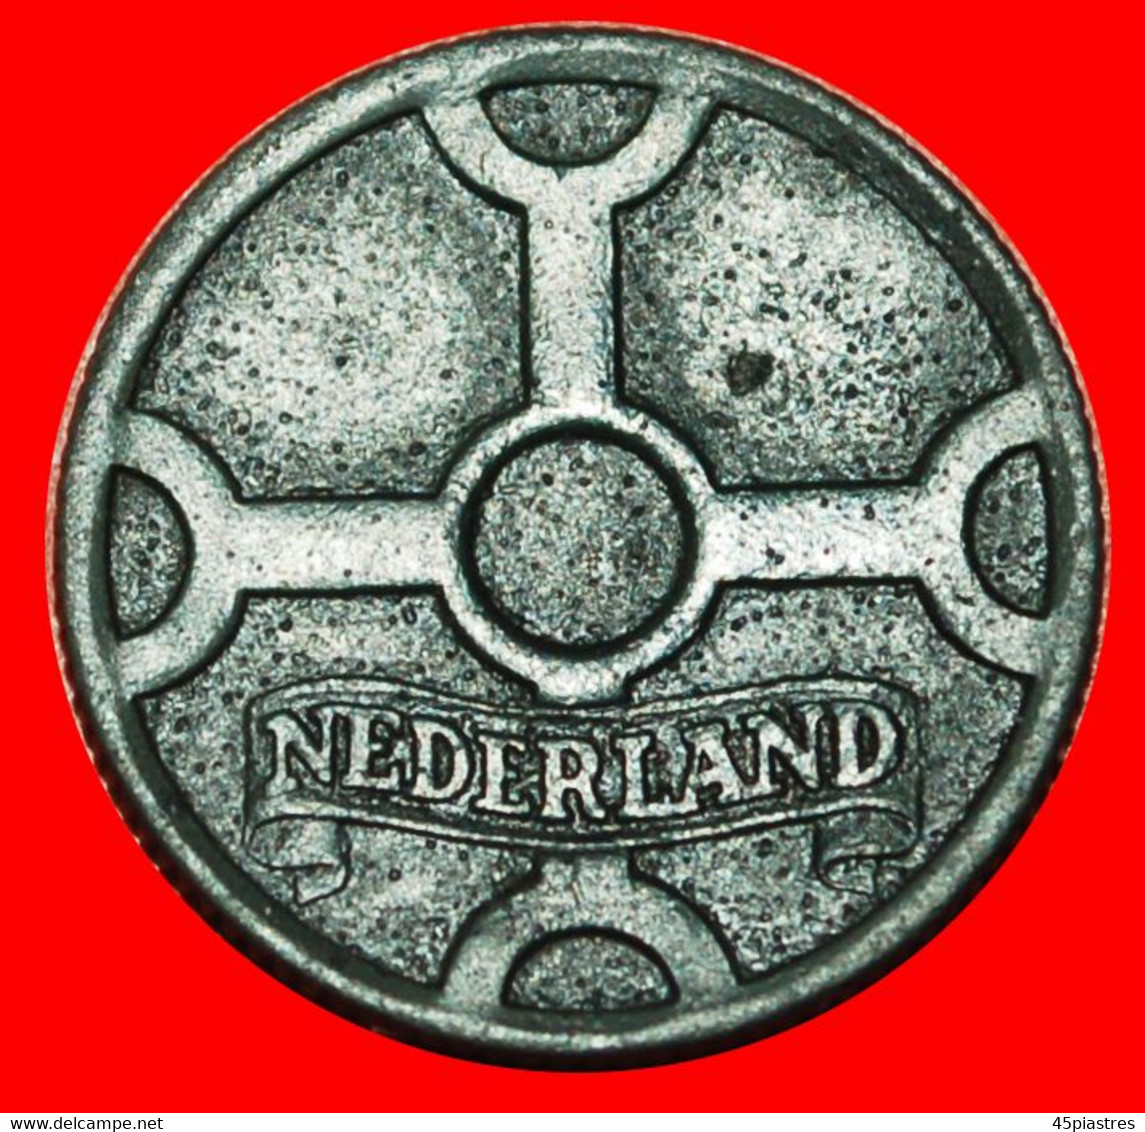 * OCCUPATION By GERMANY CROSS (1941-1944): NETHERLANDS ★ 1 CENT 1944! ERROR!★LOW START ★ NO RESERVE! - Military Coin Minting - WWII